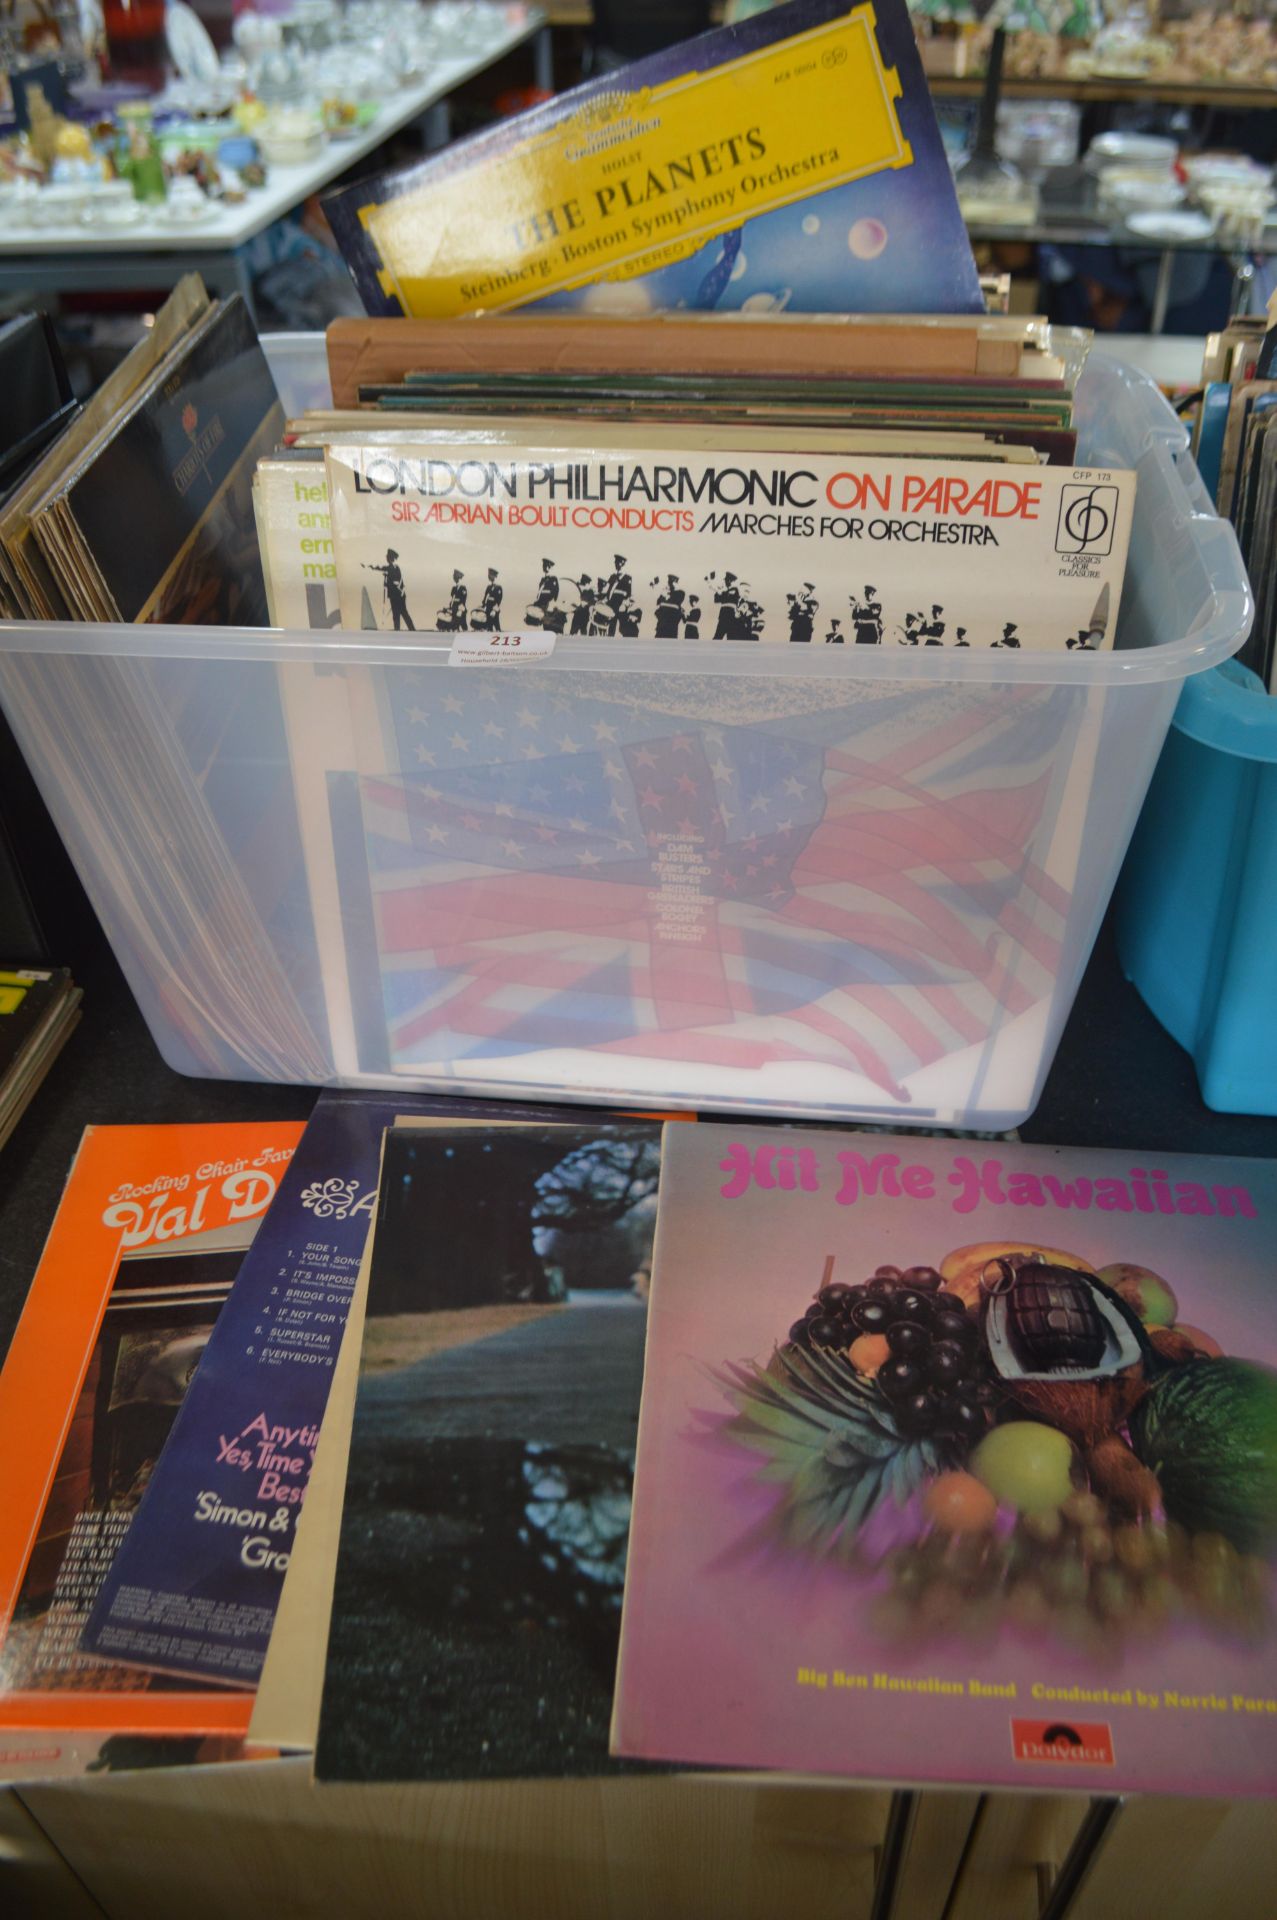 12" LP Records Including Mixed Oldies and Classica